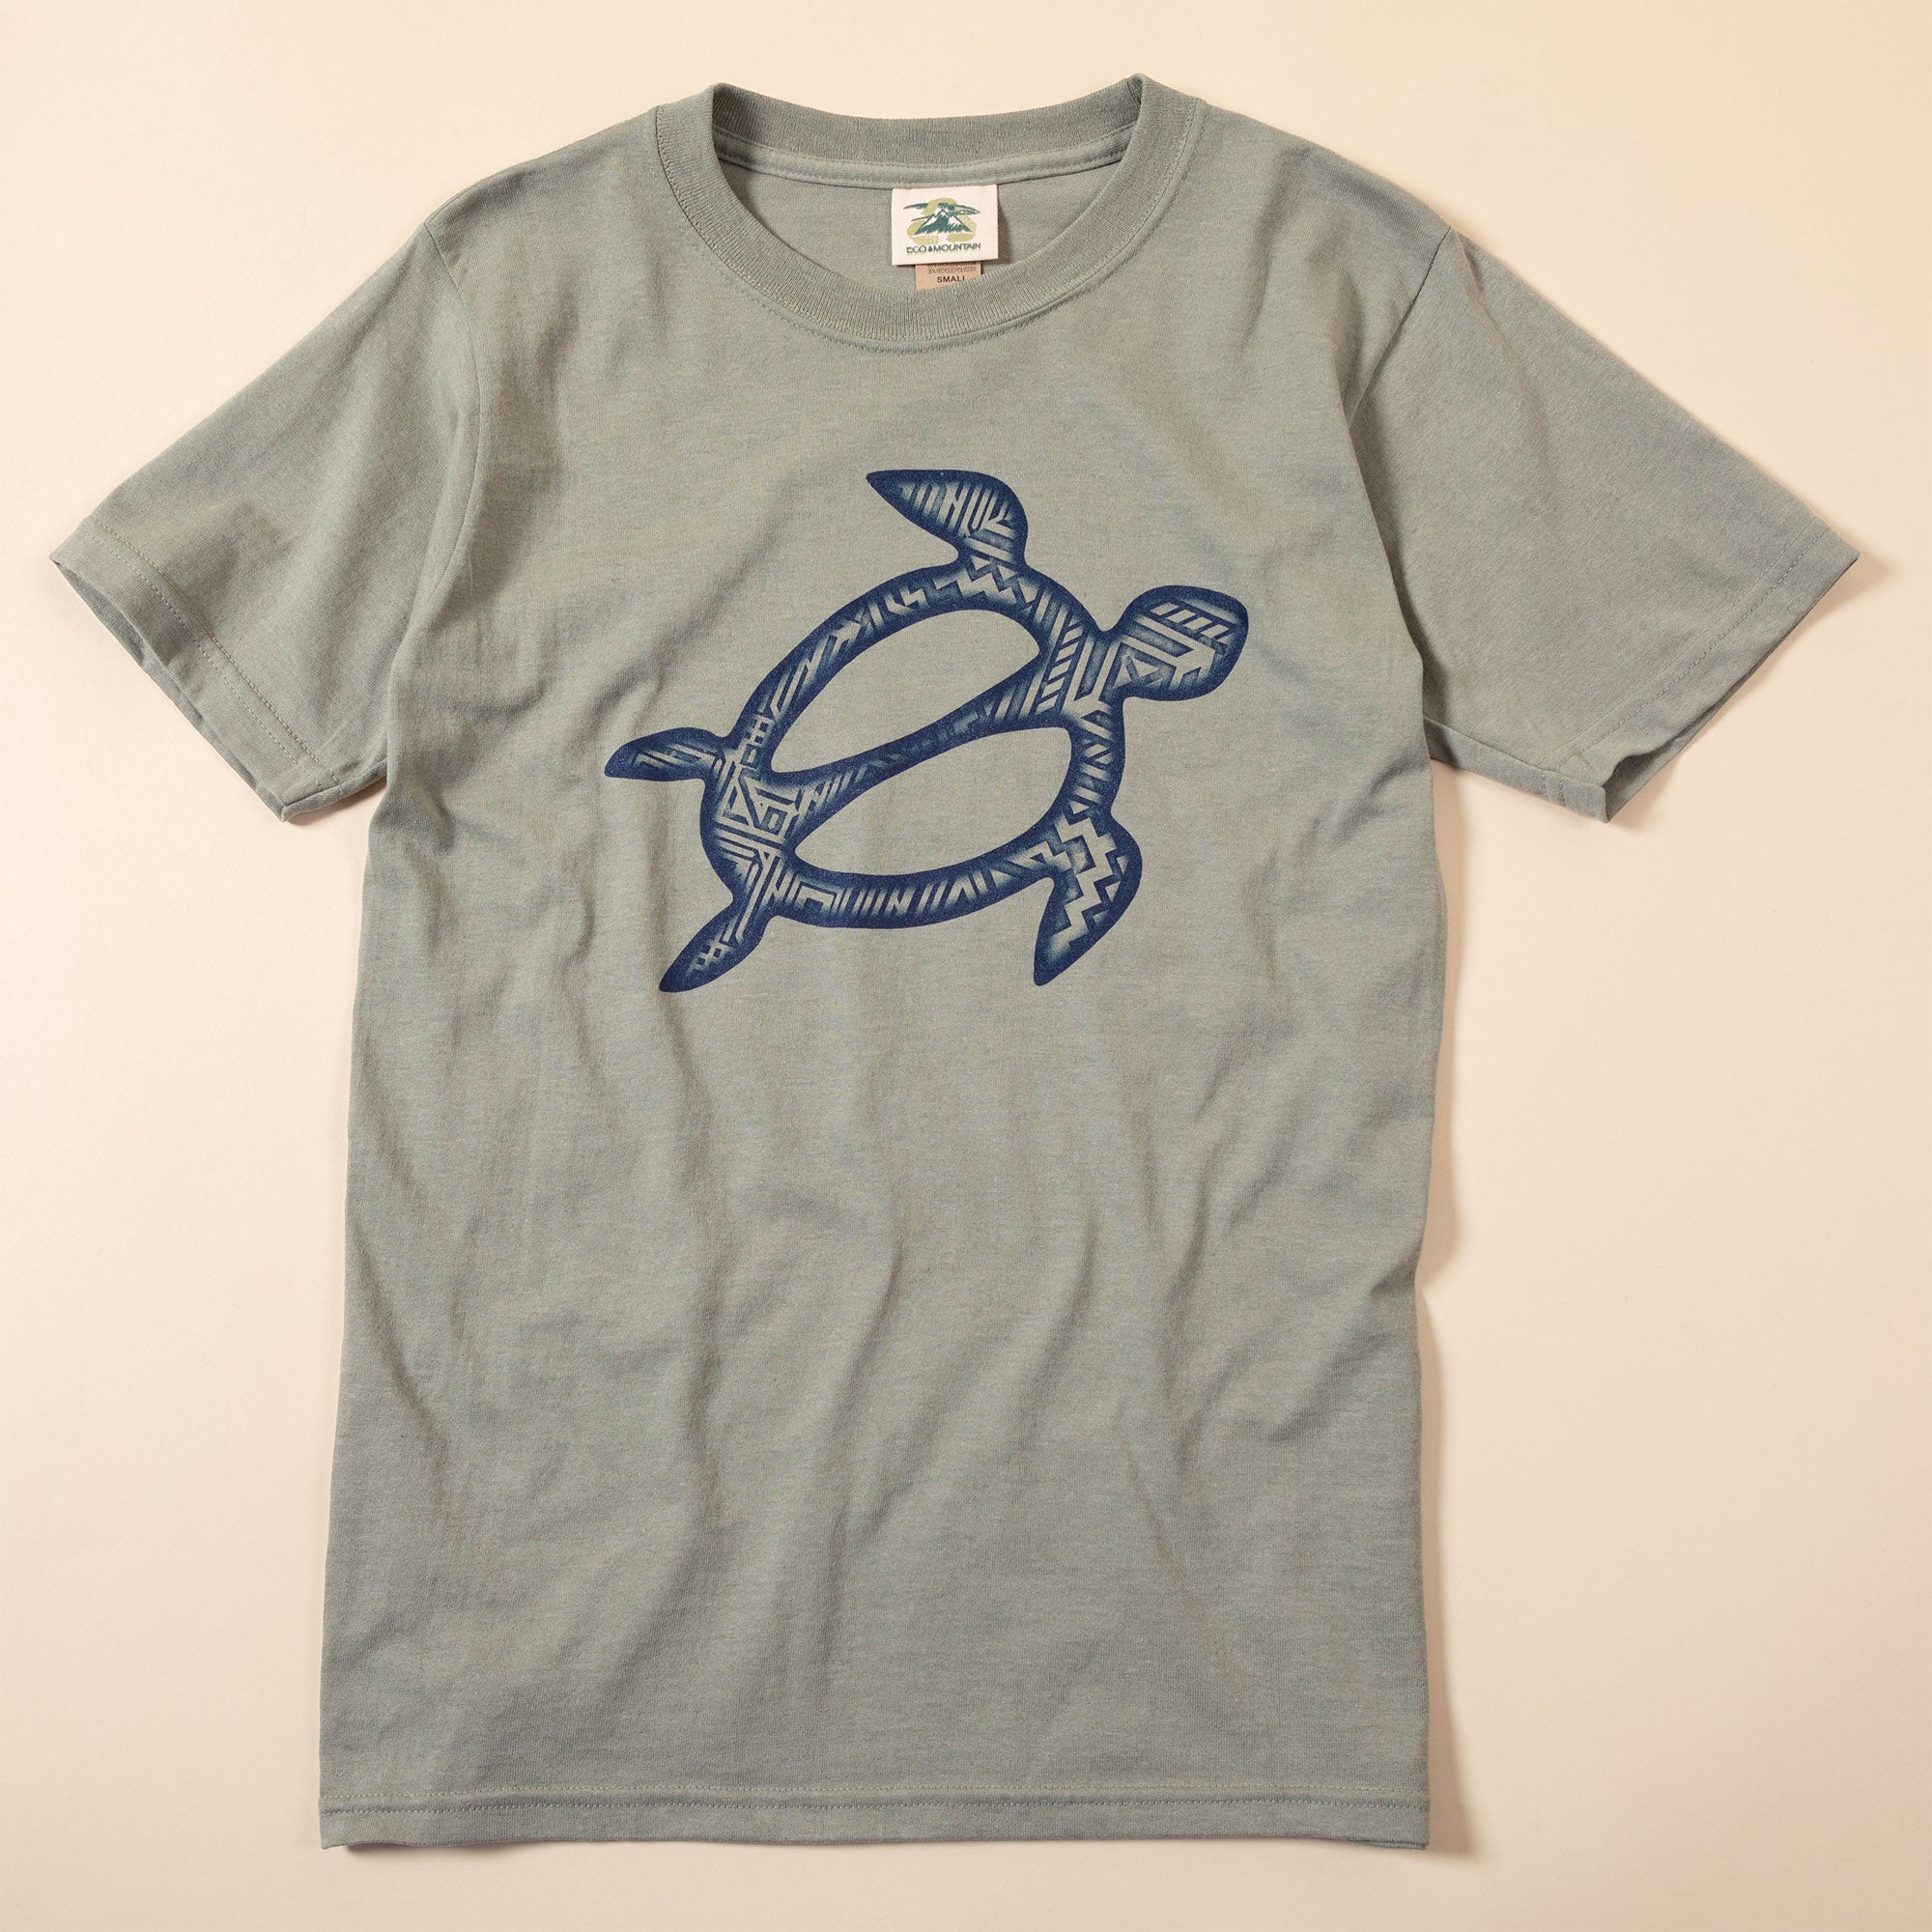 Sea Turtle Recycled Cotton T-Shirt - S